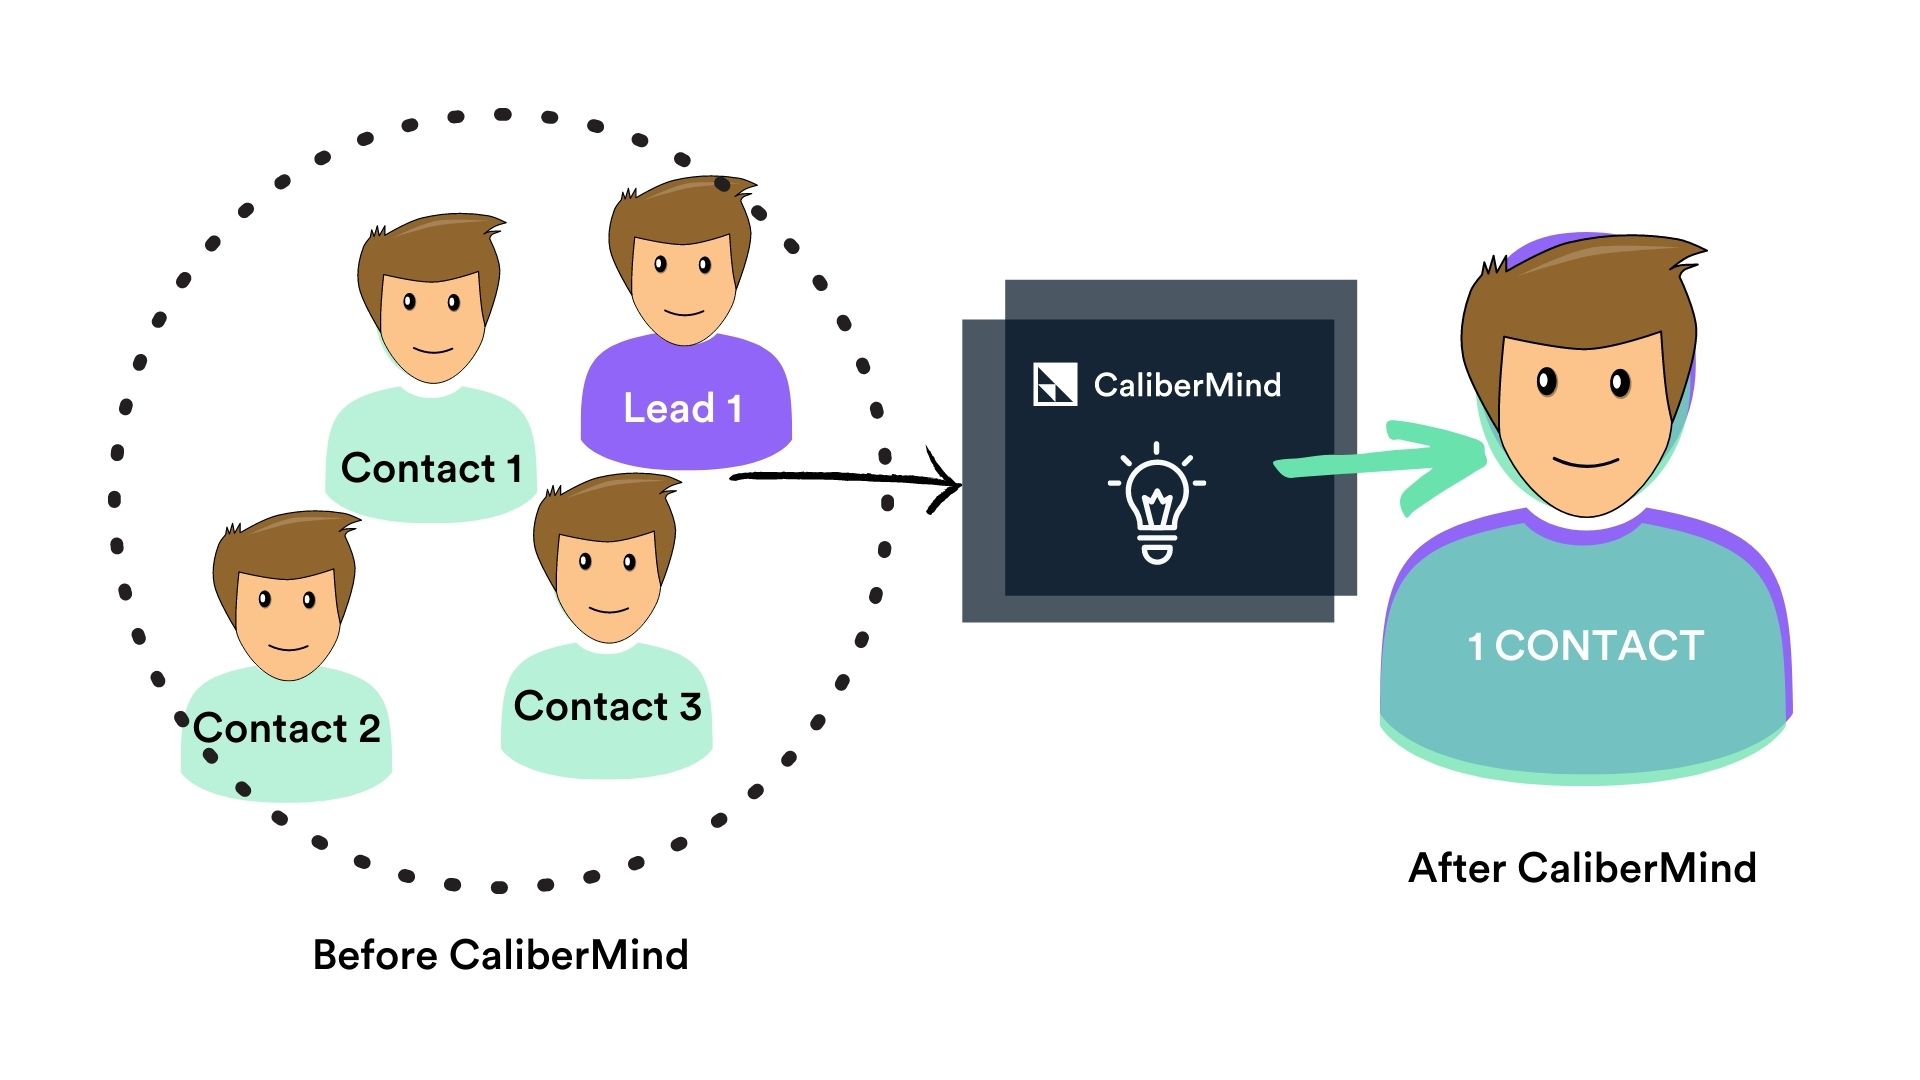 CaliberMind automatically checks for duplicated records and then merges them to minimize redundancies in your data